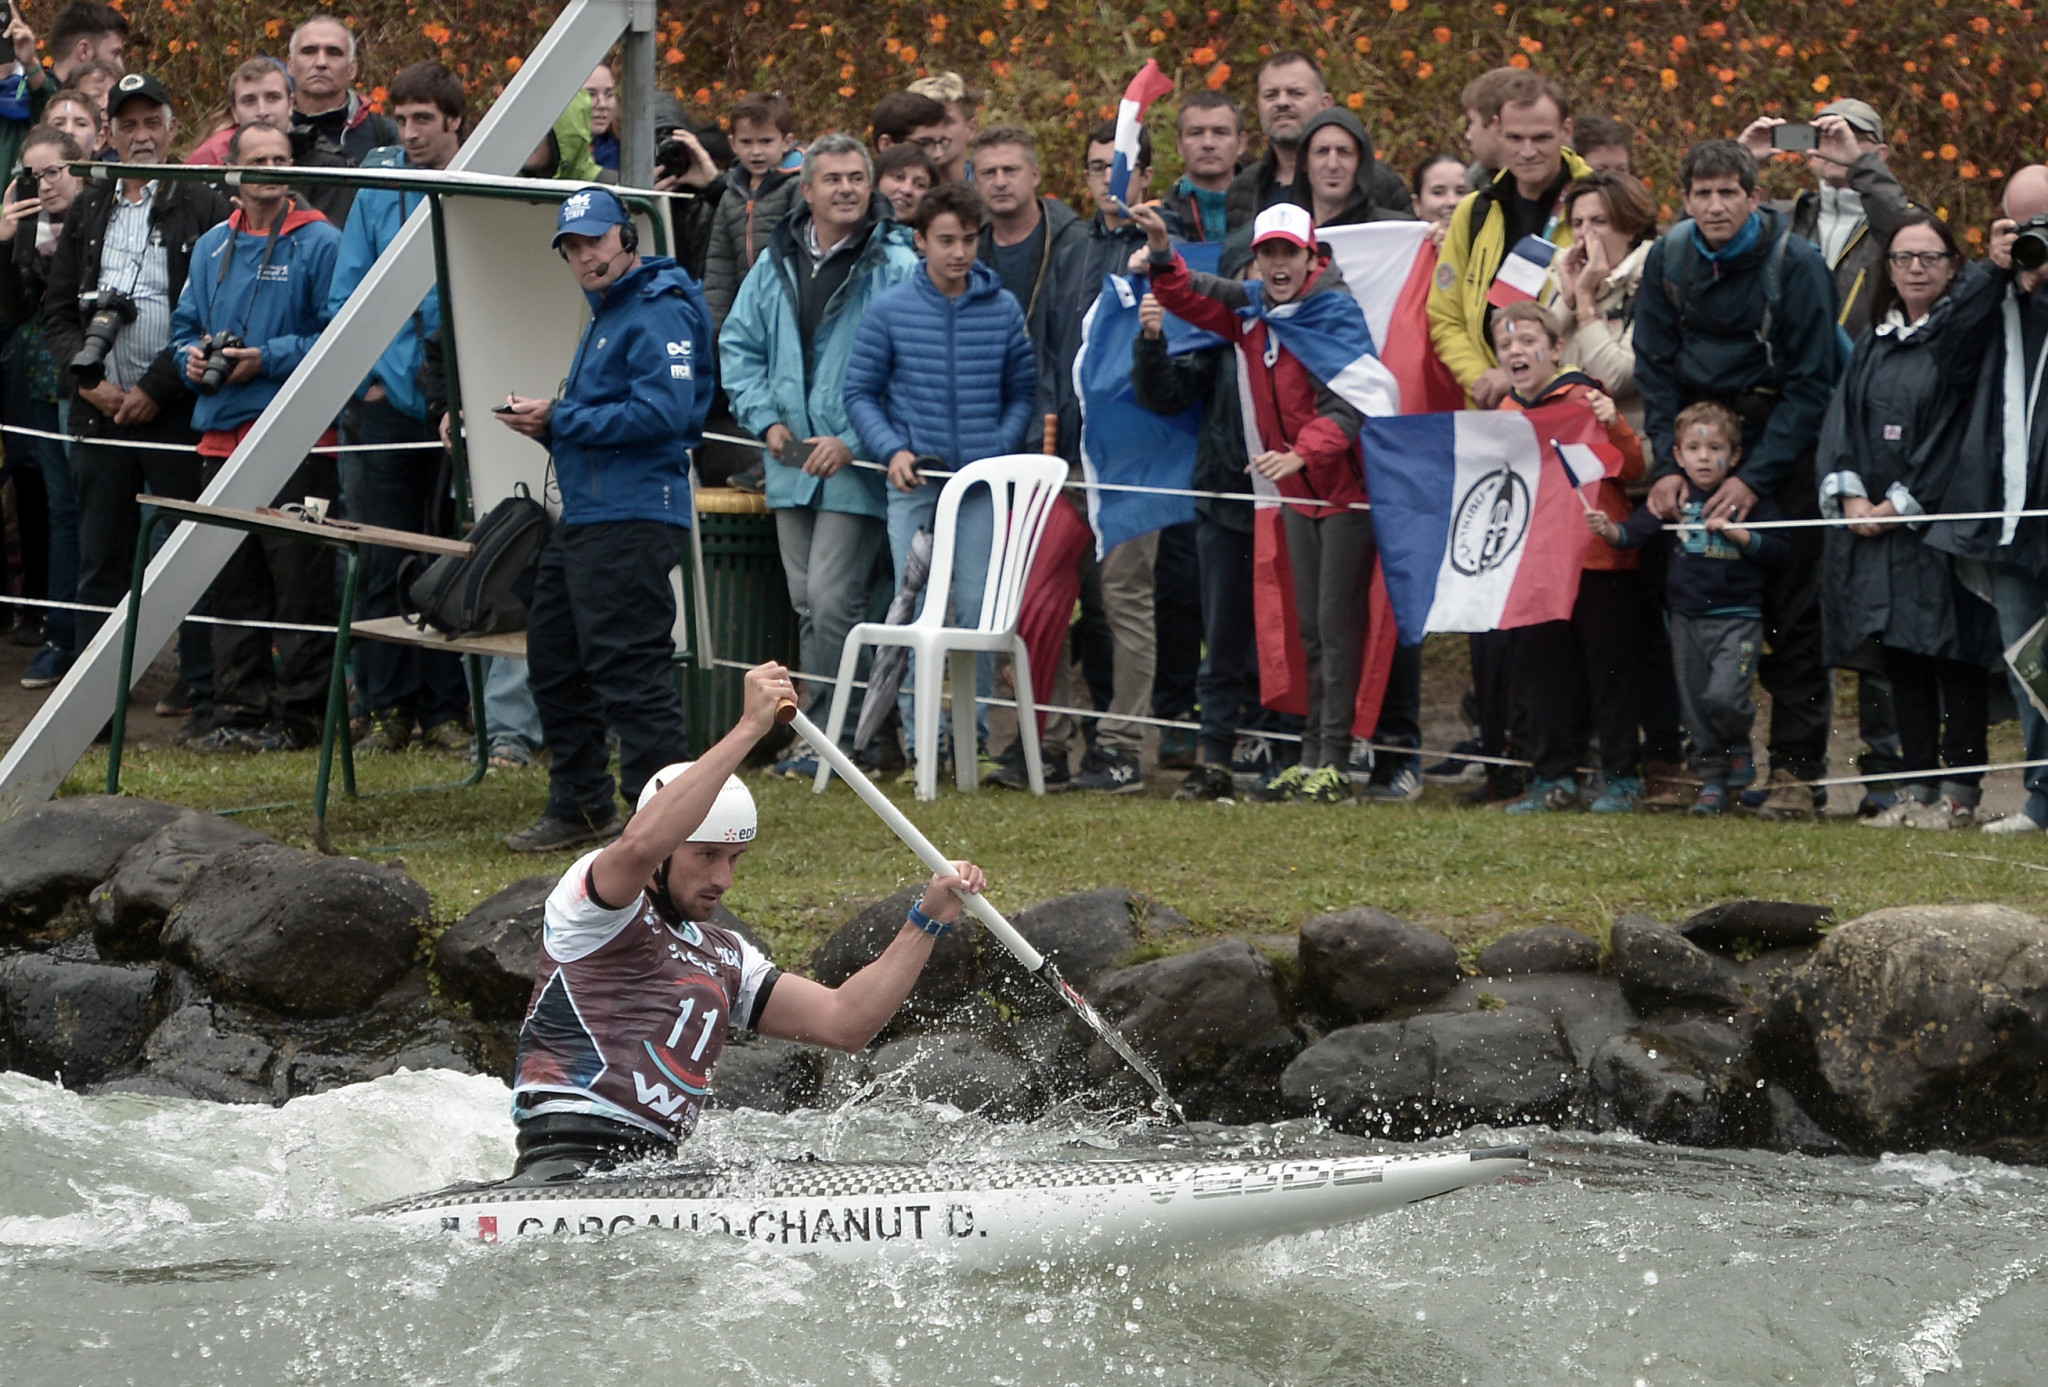 Pau staged the ICF Canoe Slalom World Championships in 2017 ©Getty Images